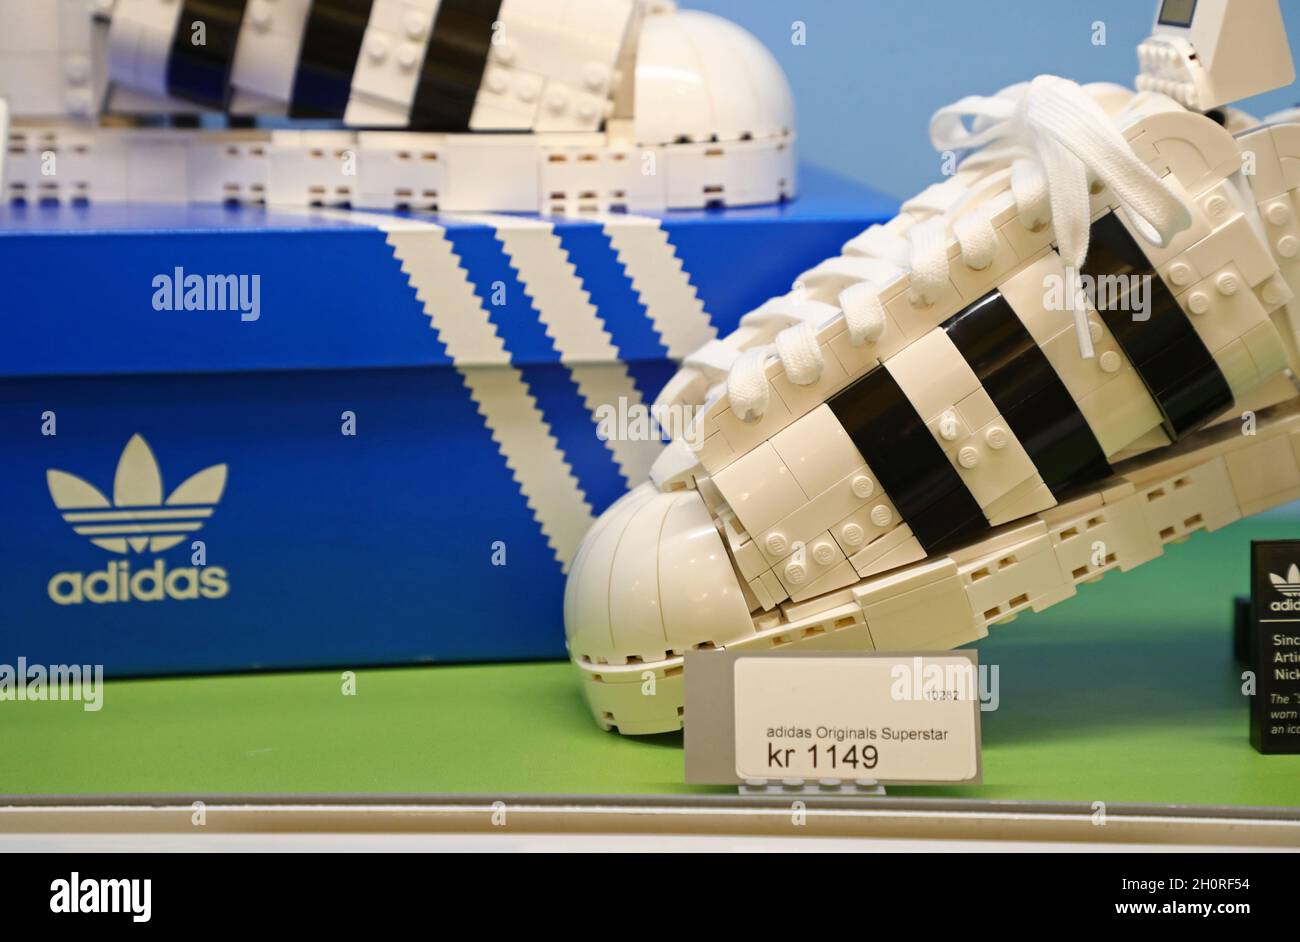 Adidas Originals Superstar lego in a LEGO Store, Westfield Mall of  Scandinavia in Solna, Stockholm, Sweden, during Sunday afternoon Stock  Photo - Alamy